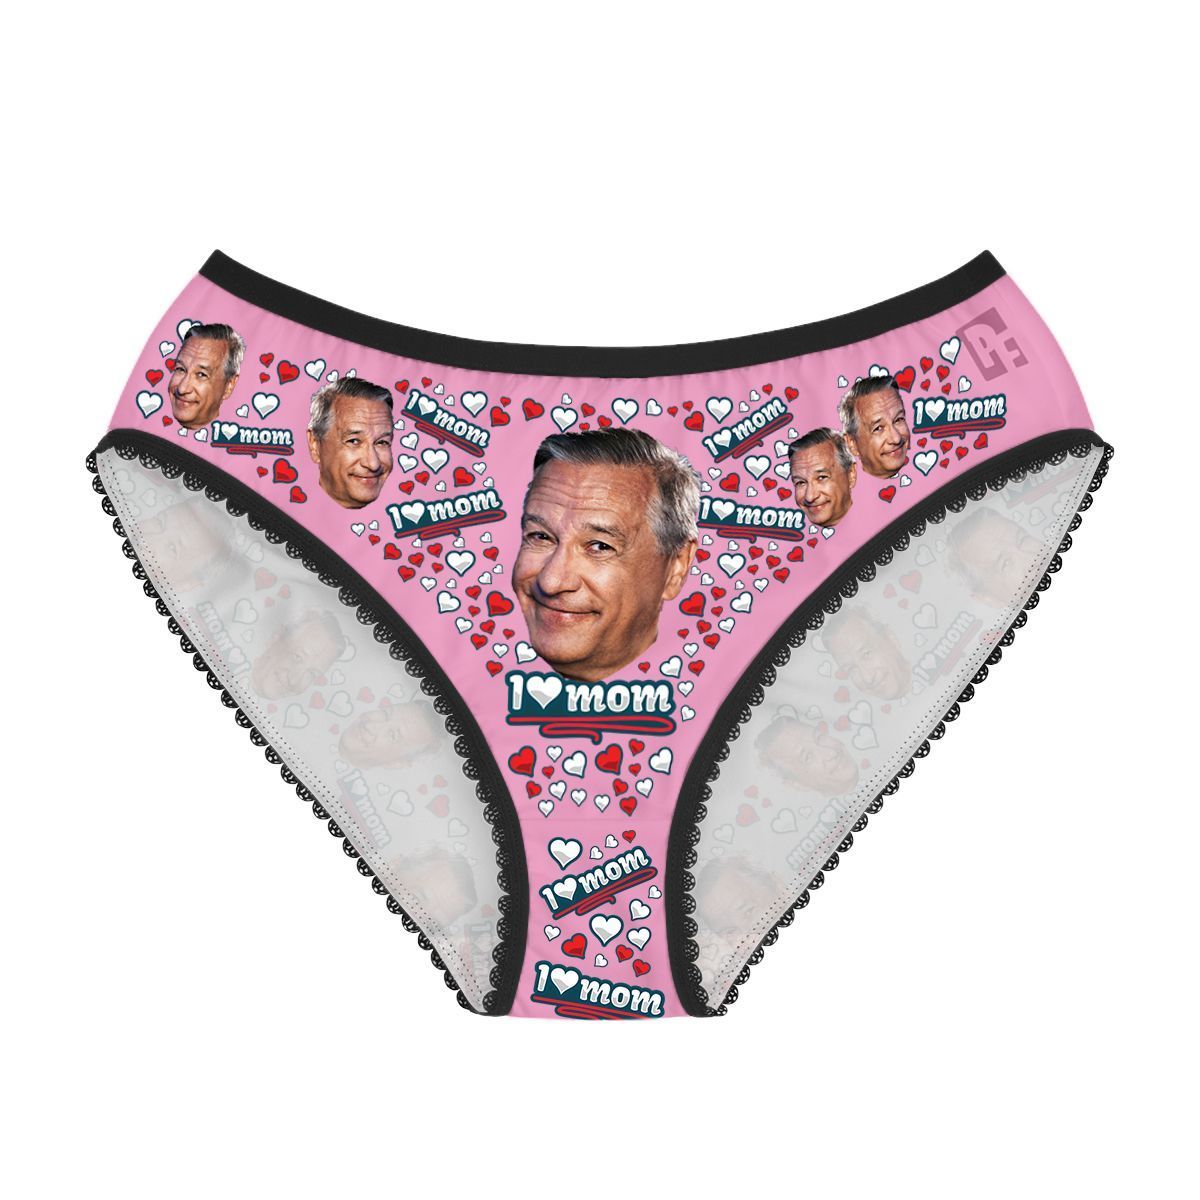 Pink Love mom women's underwear briefs personalized with photo printed on them